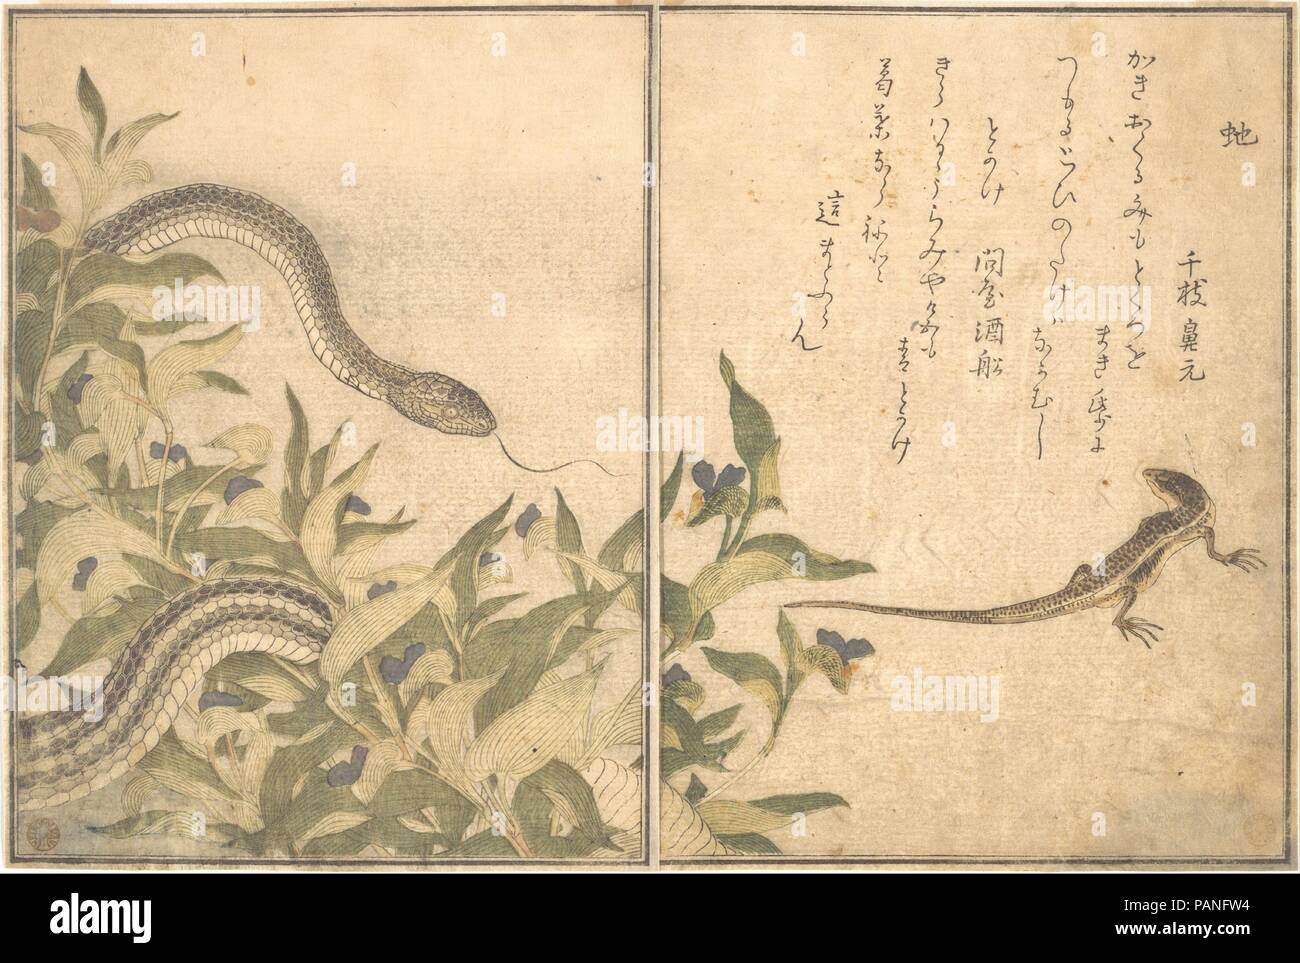 Rat Snake (Hebi); Lizard or Skink (Tokage), from the Picture Book of Crawling Creatures (Ehon mushi erami). Artist: Kitagawa Utamaro (Japanese, ca. 1754-1806). Culture: Japan. Dimensions: Overall: 10 1/2 x 7 1/4in. (26.7 x 18.4cm). Date: 1788.  Ehon mushi erami (Picture Book of Crawling Creatures) is illustrated with fifteen designs of insects and other garden creatures by Utamaro. Published by Tsutaya Juzaburo , the poems were selected and introduced by a preface written by the poet and scholar Yadoya no Meshimori (Rokujuen; 1753-1830), who later became head of the influential Go-gawa poetry  Stock Photo